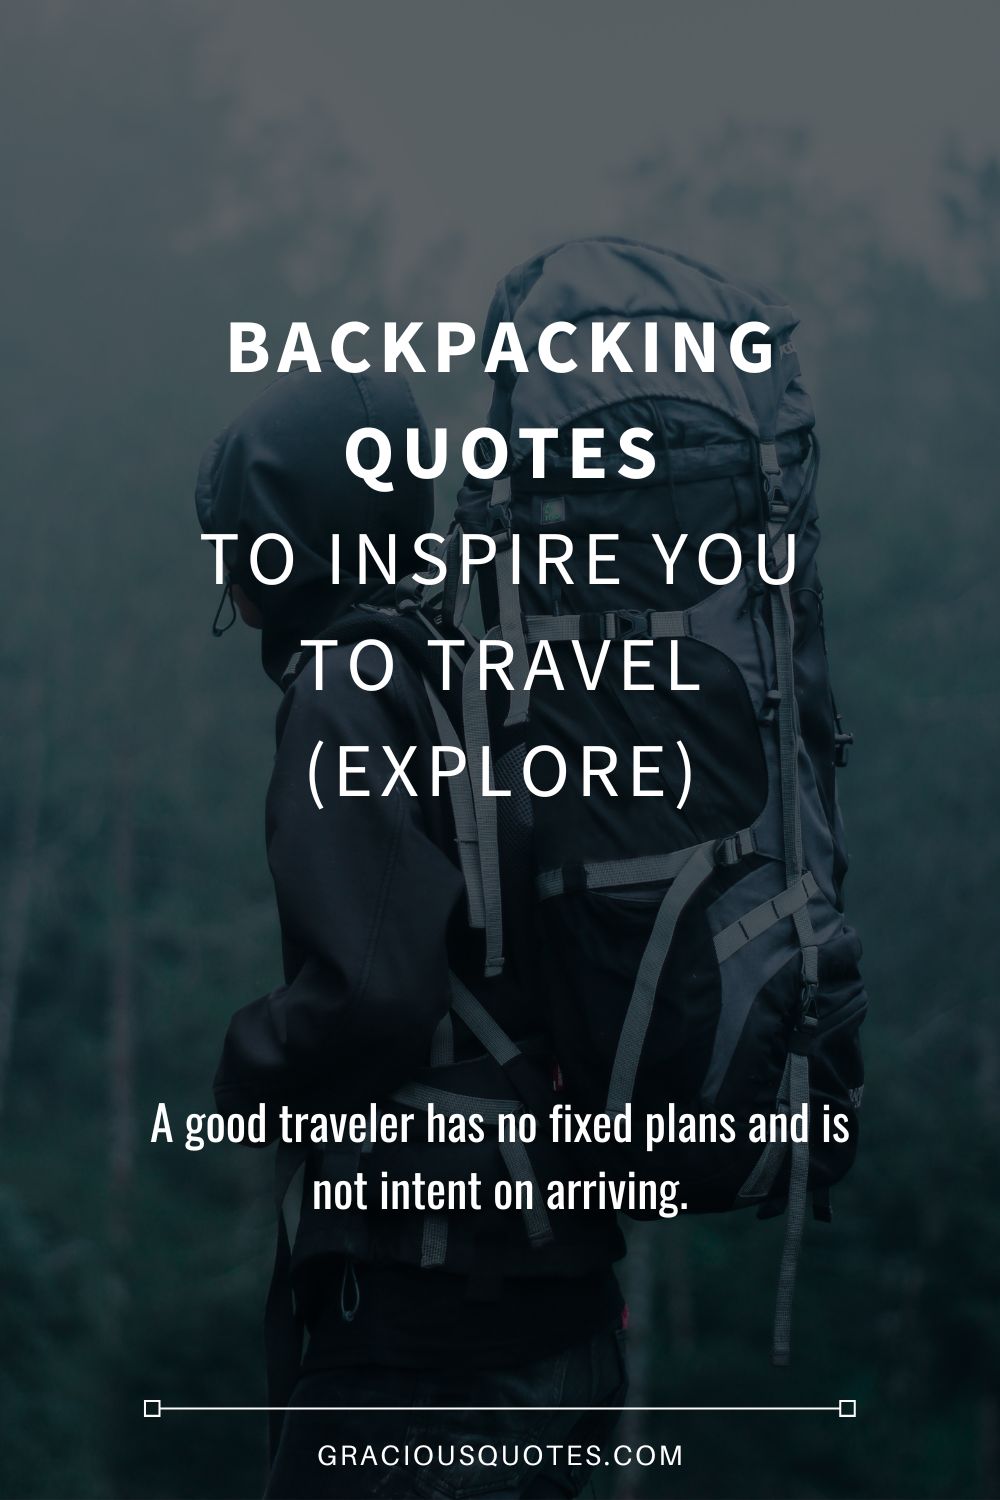 Backpacking Quotes to Inspire You to Travel (EXPLORE) - Gracious Quotes